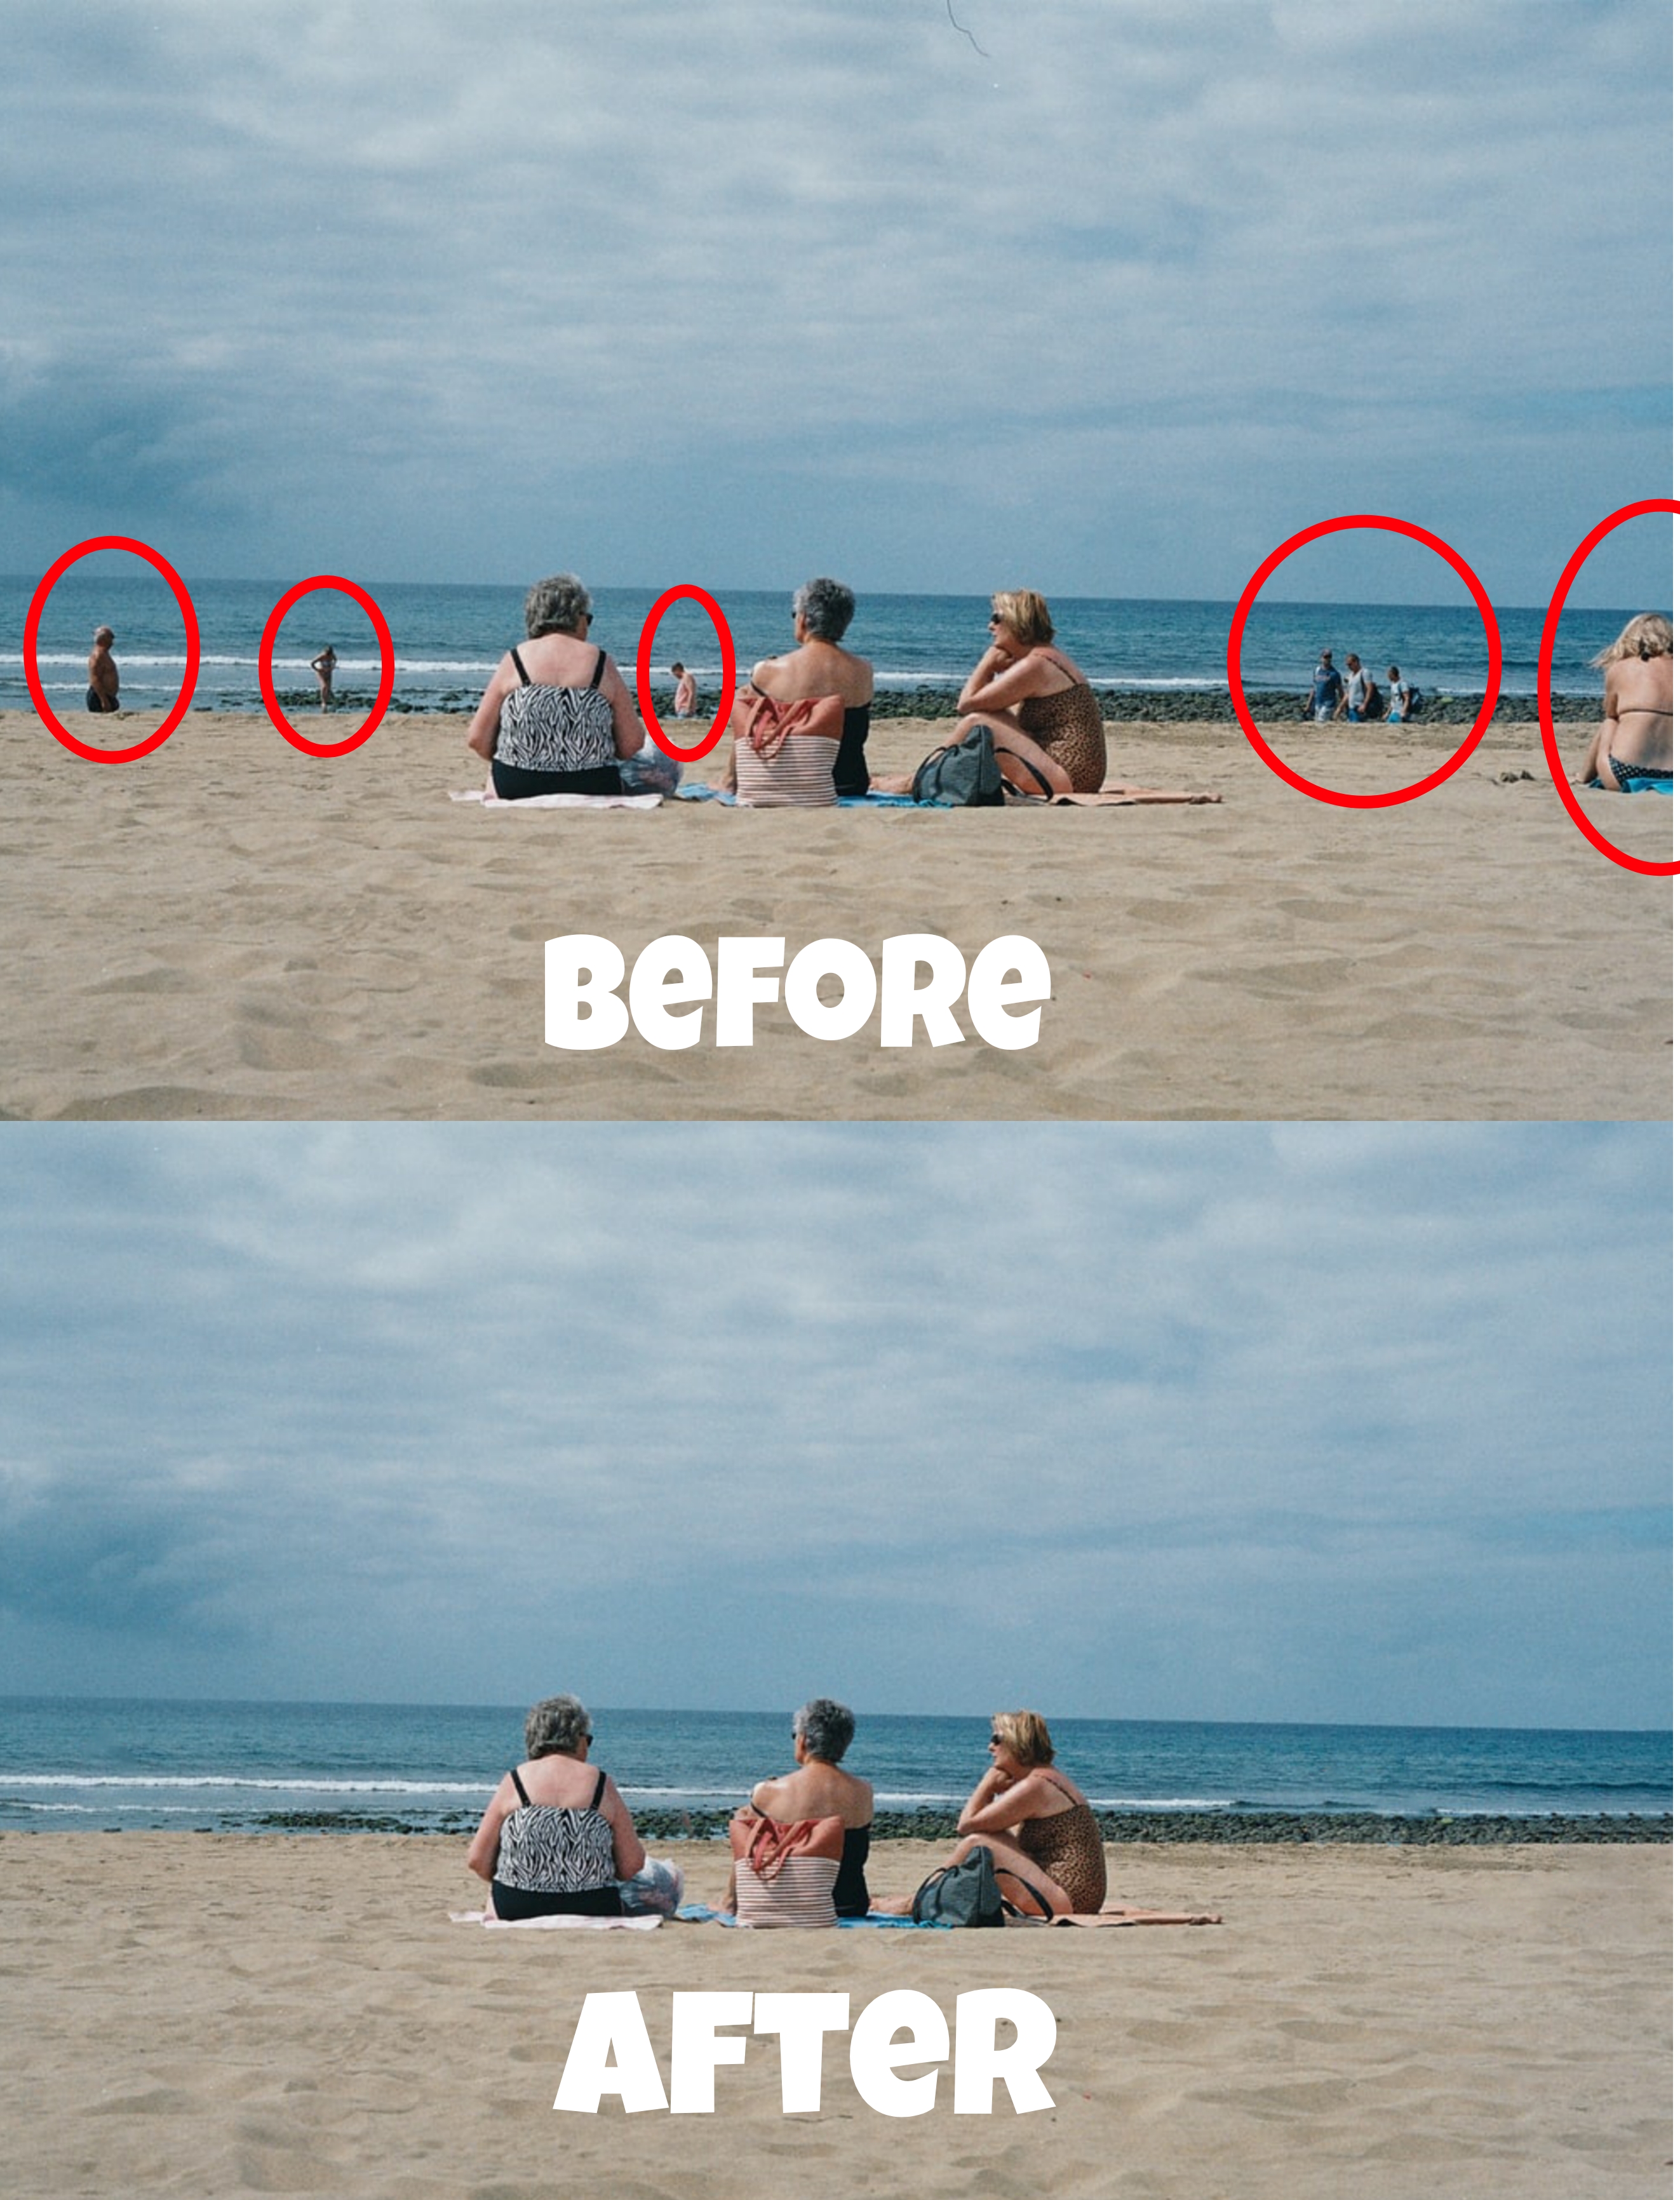 i will retouch pr Photoshop or remove your image in one hour 